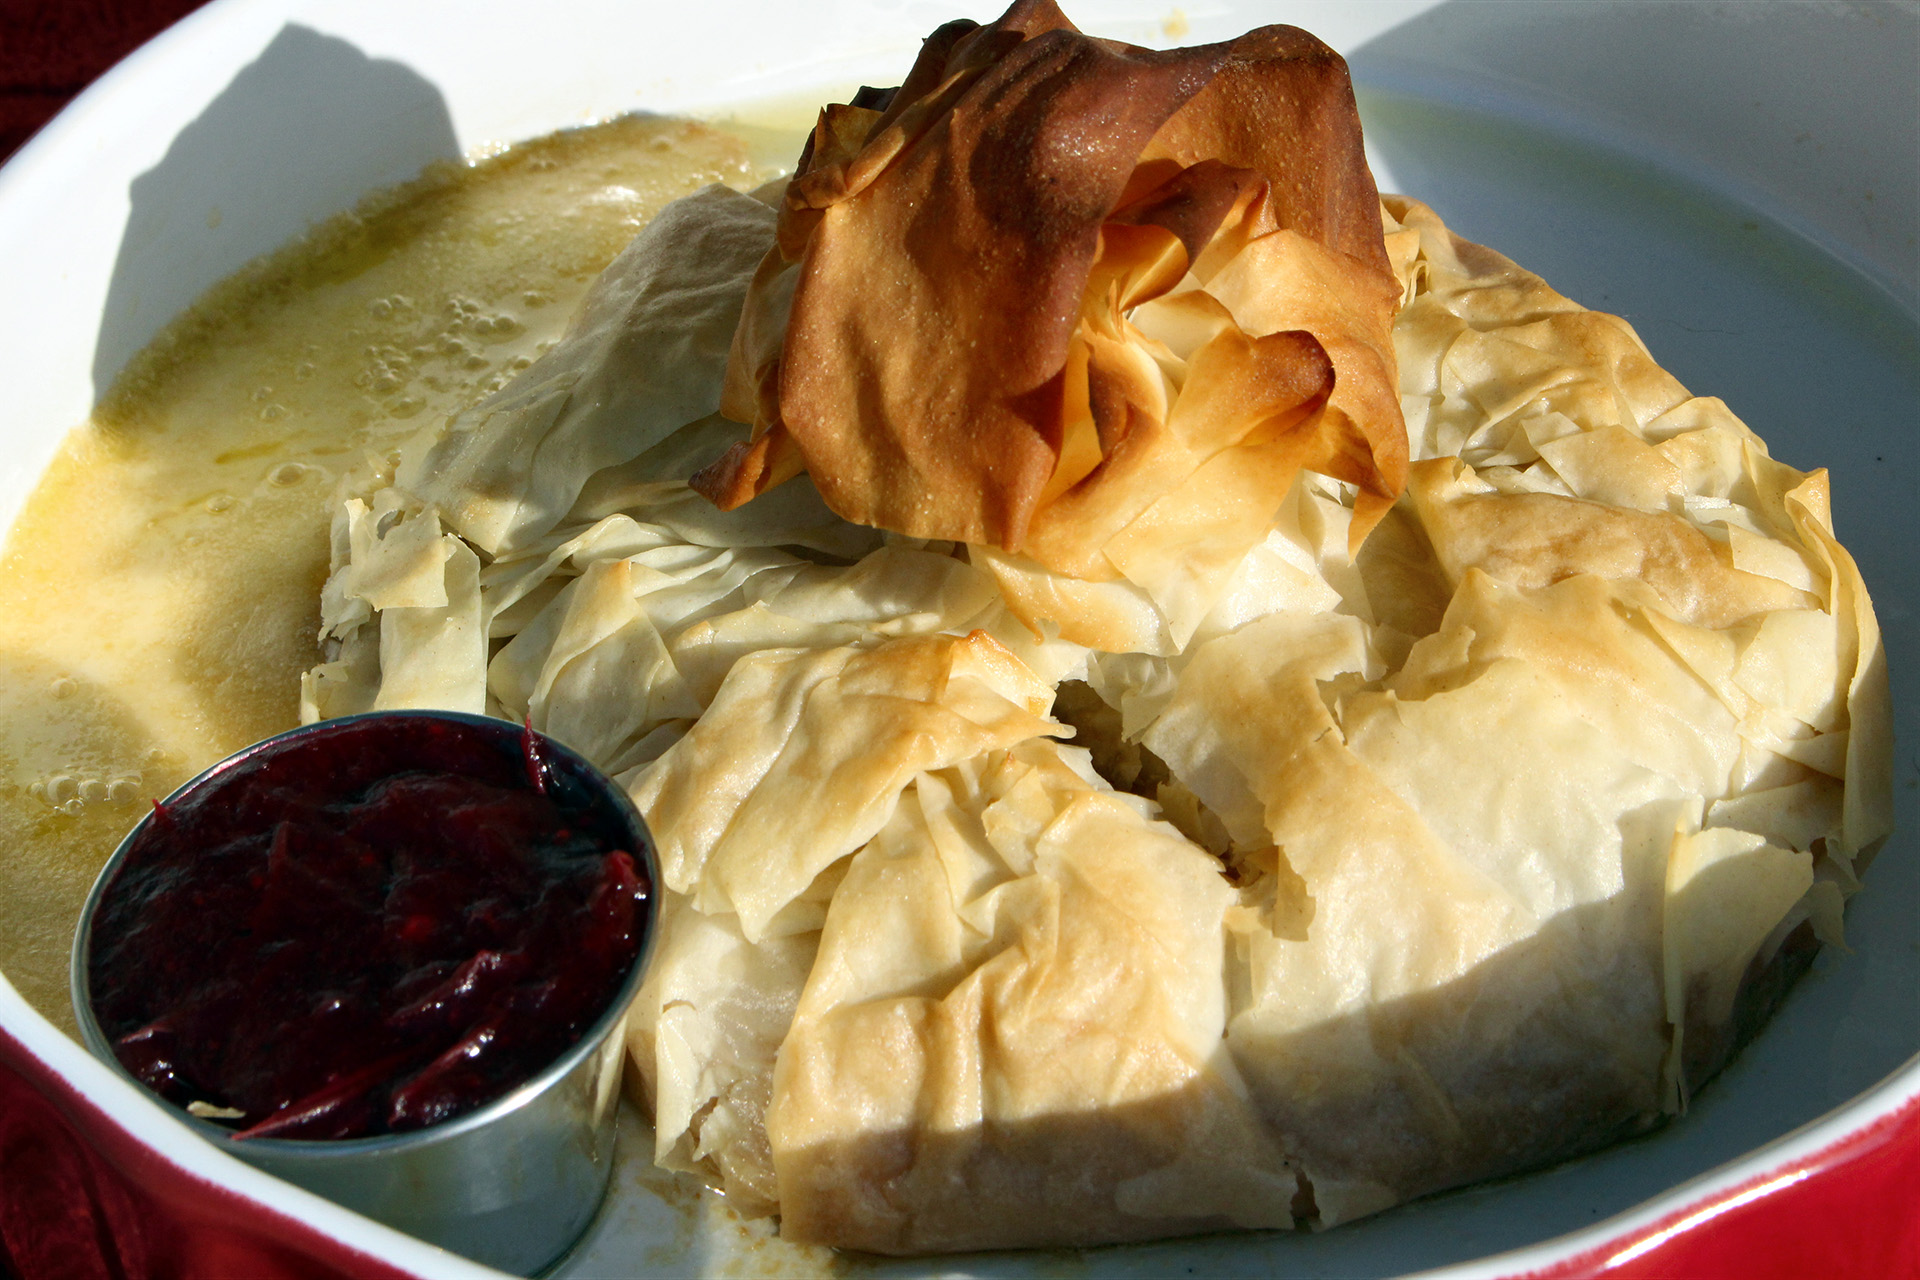 “Spotlight” Phyllo Baked Brie with Maple Syrup